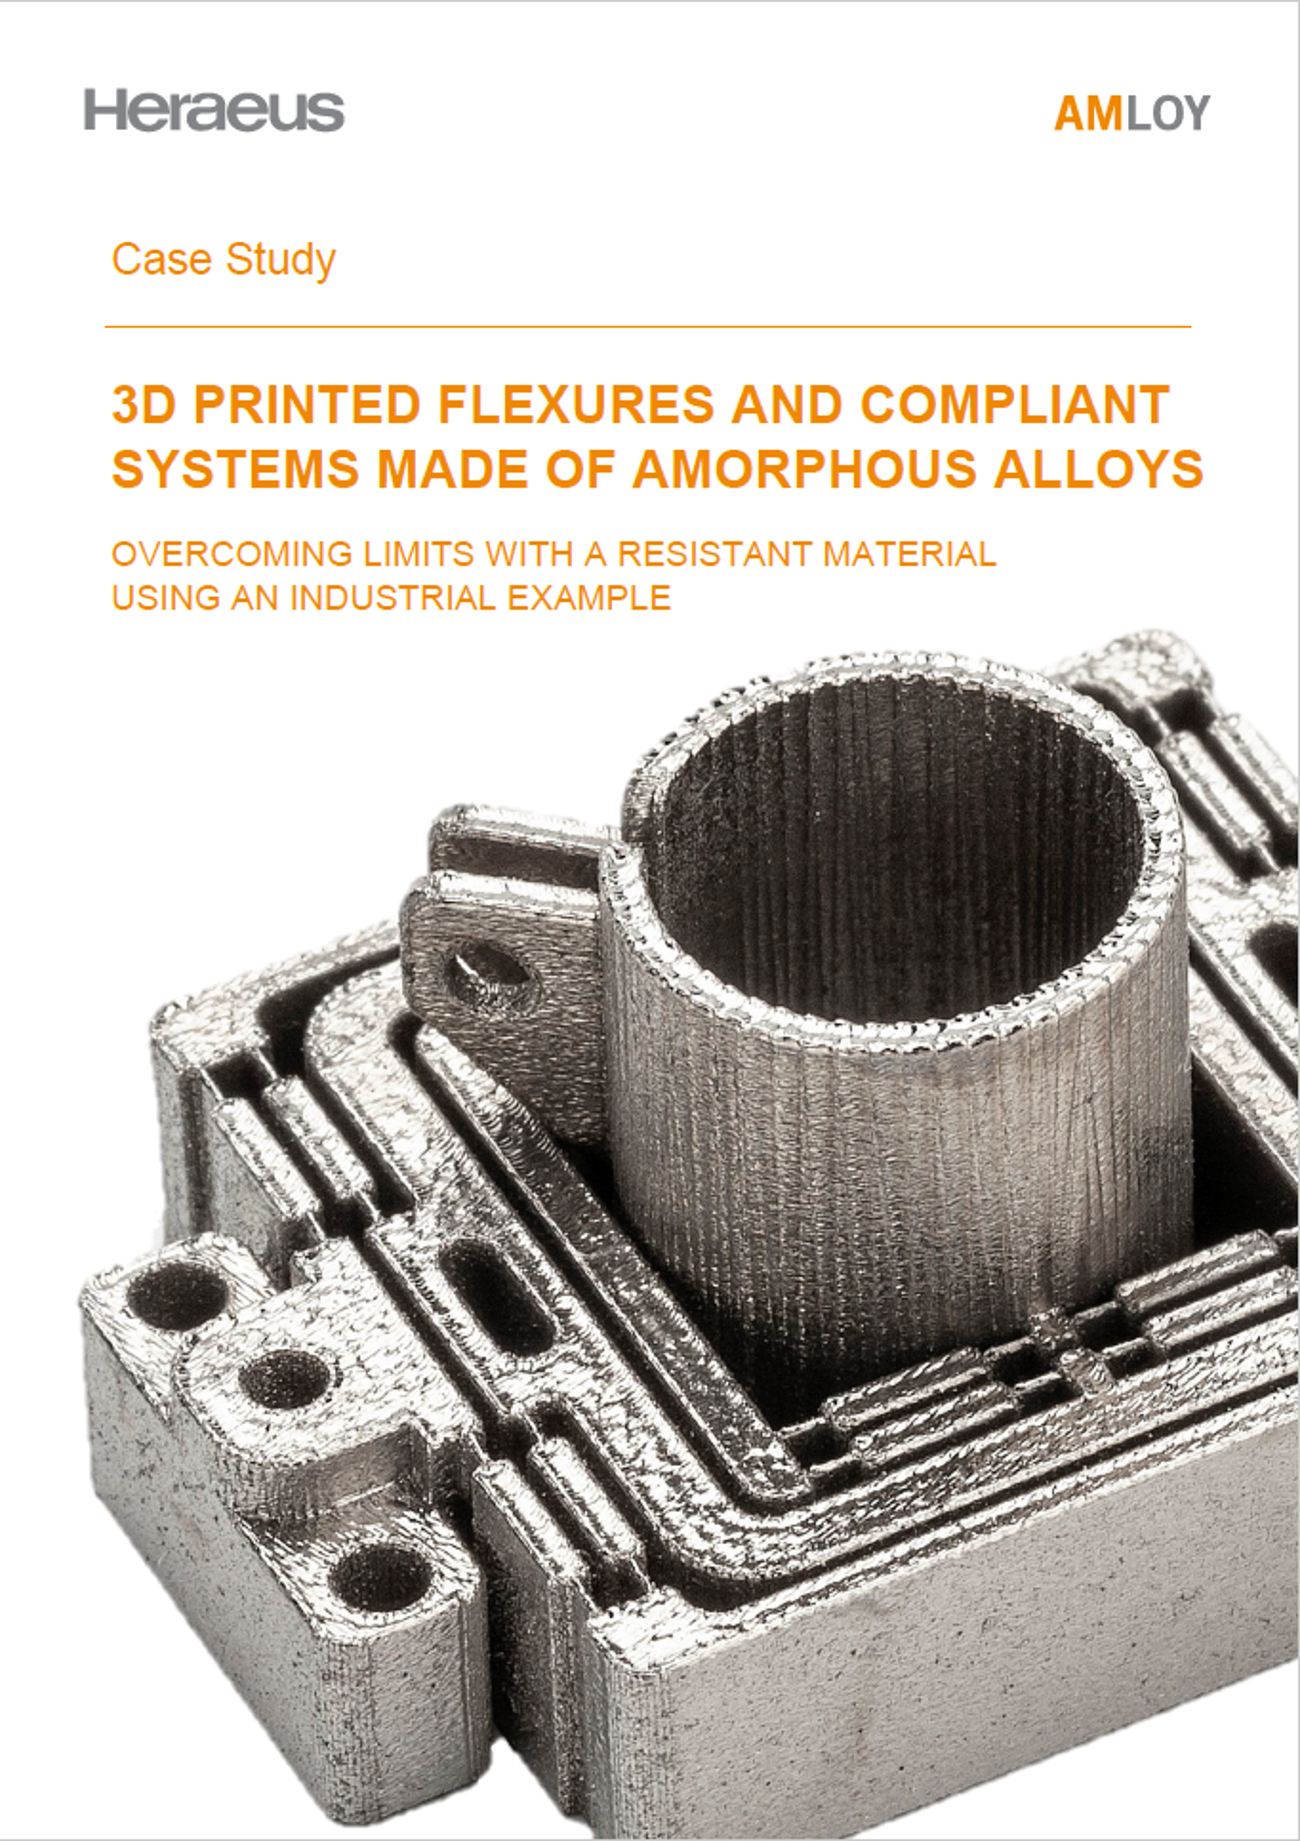 Case Study - 3D PRINTED FLEXURES AND COMPLIANT SYSTEMS MADE OF AMORPHOUS ALLOYS